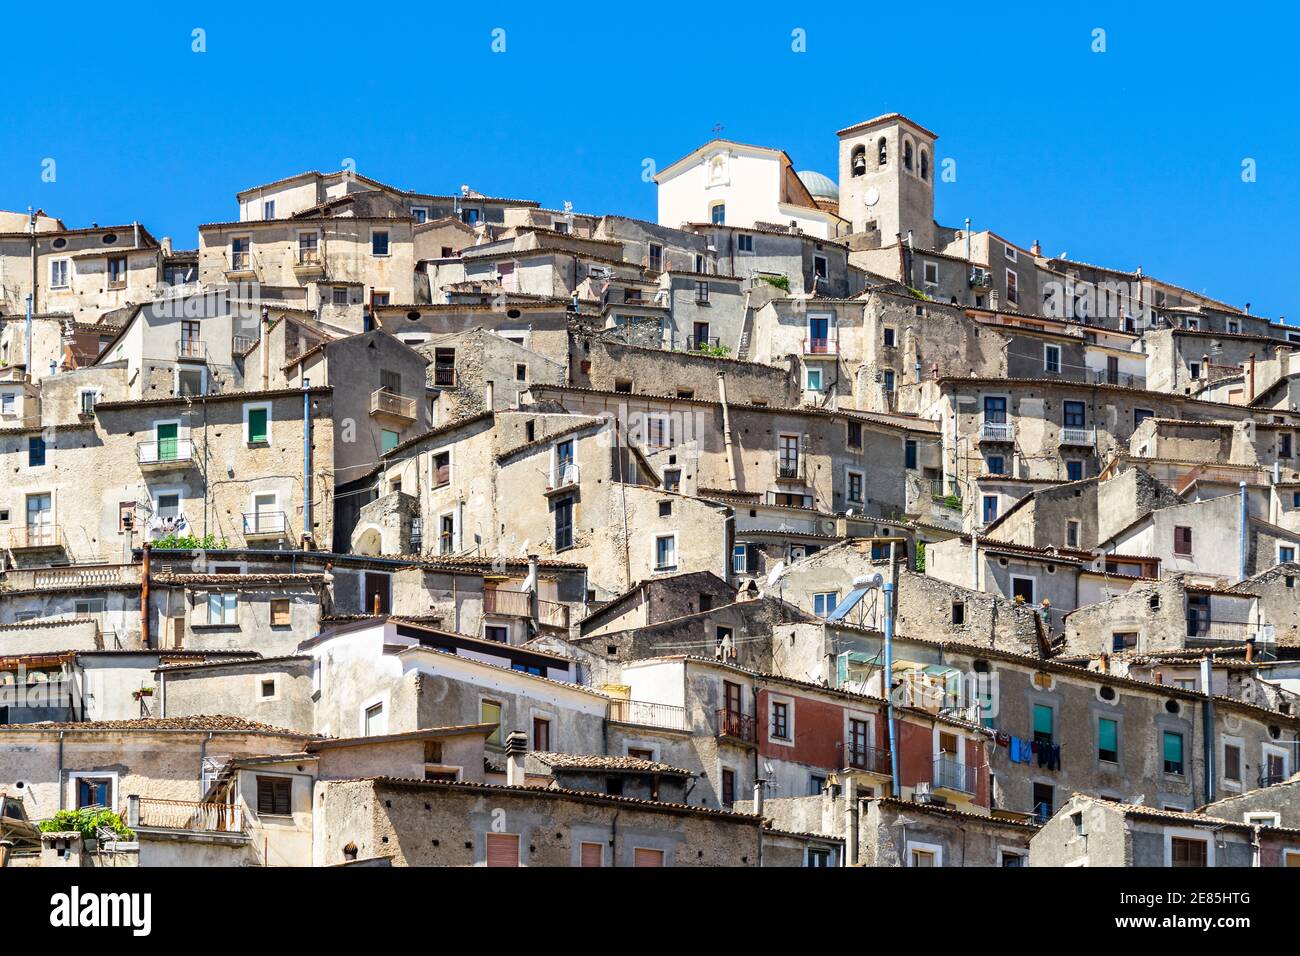 Typical houses of Morano Calabro, one of the most beautiful villages of Calabria region, Italy Stock Photo